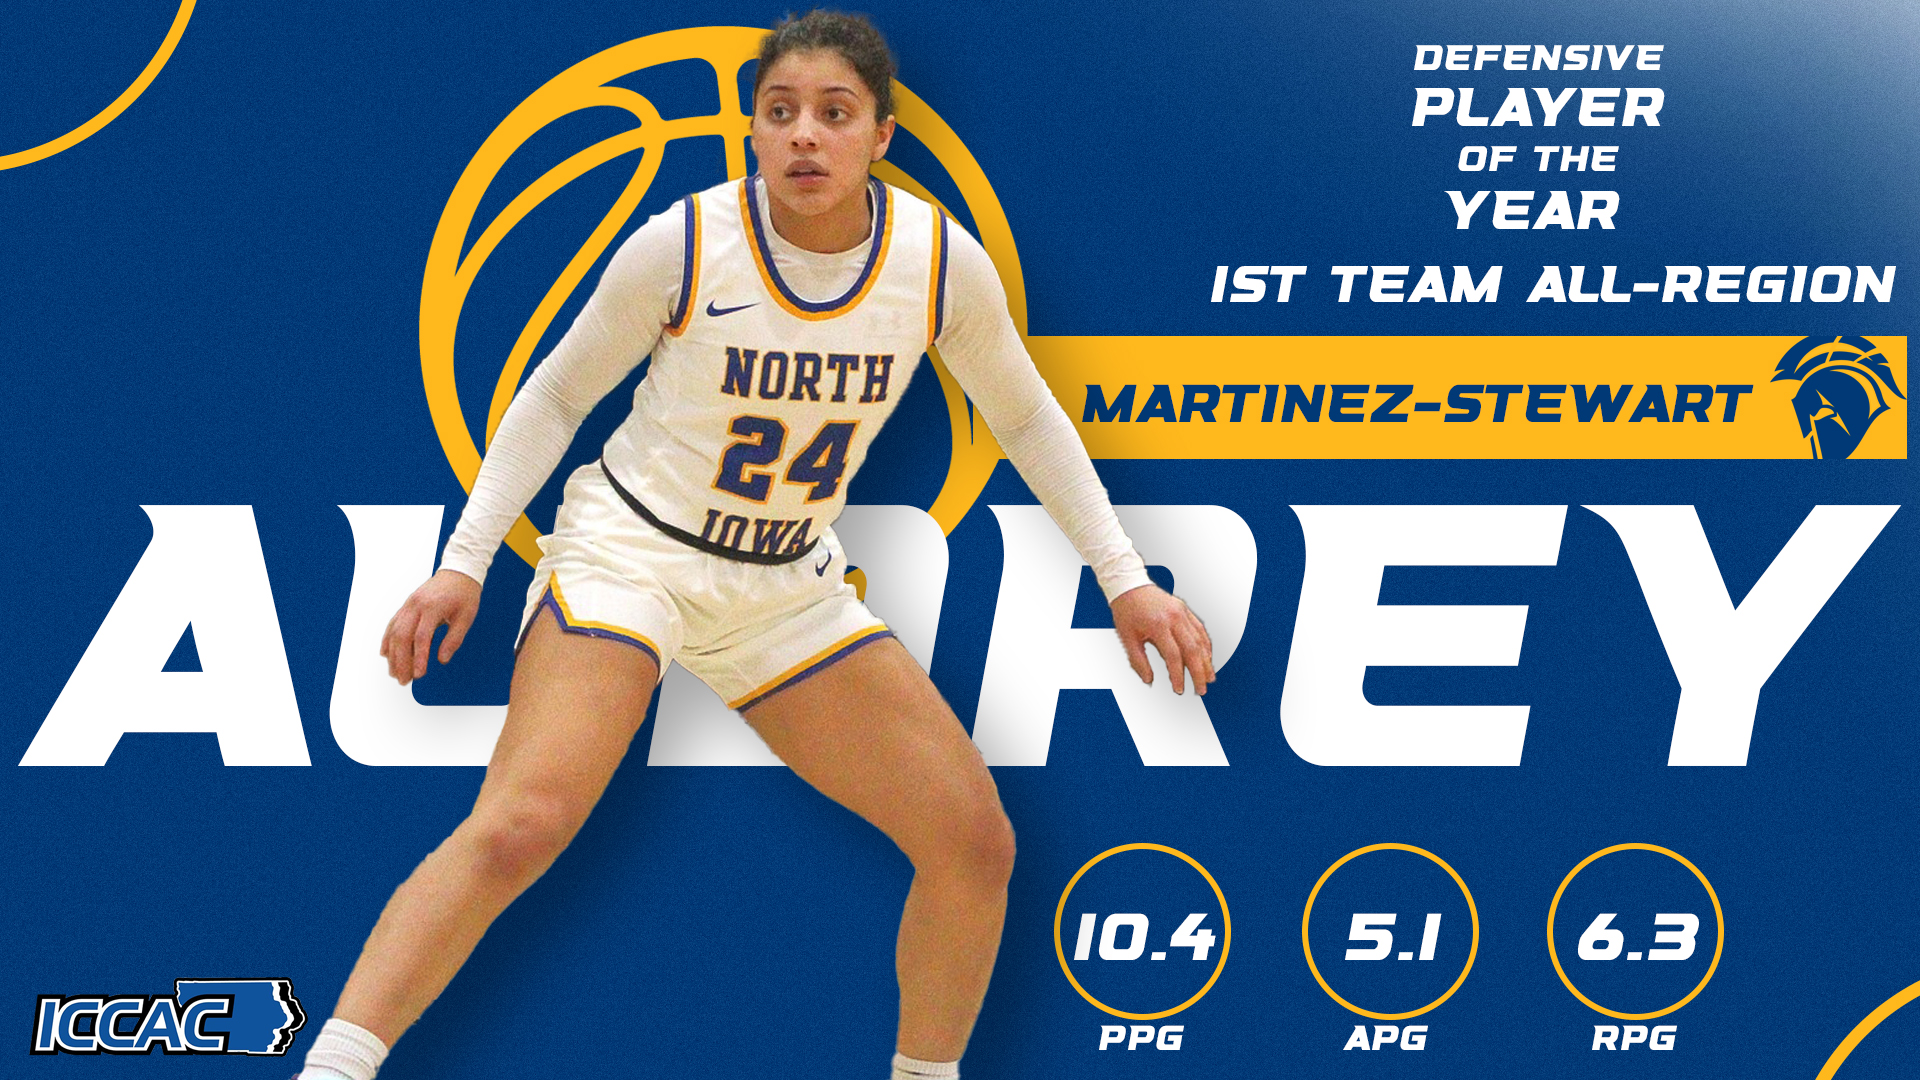 NIACC's Martinez-Stewart is league's defensive player of year